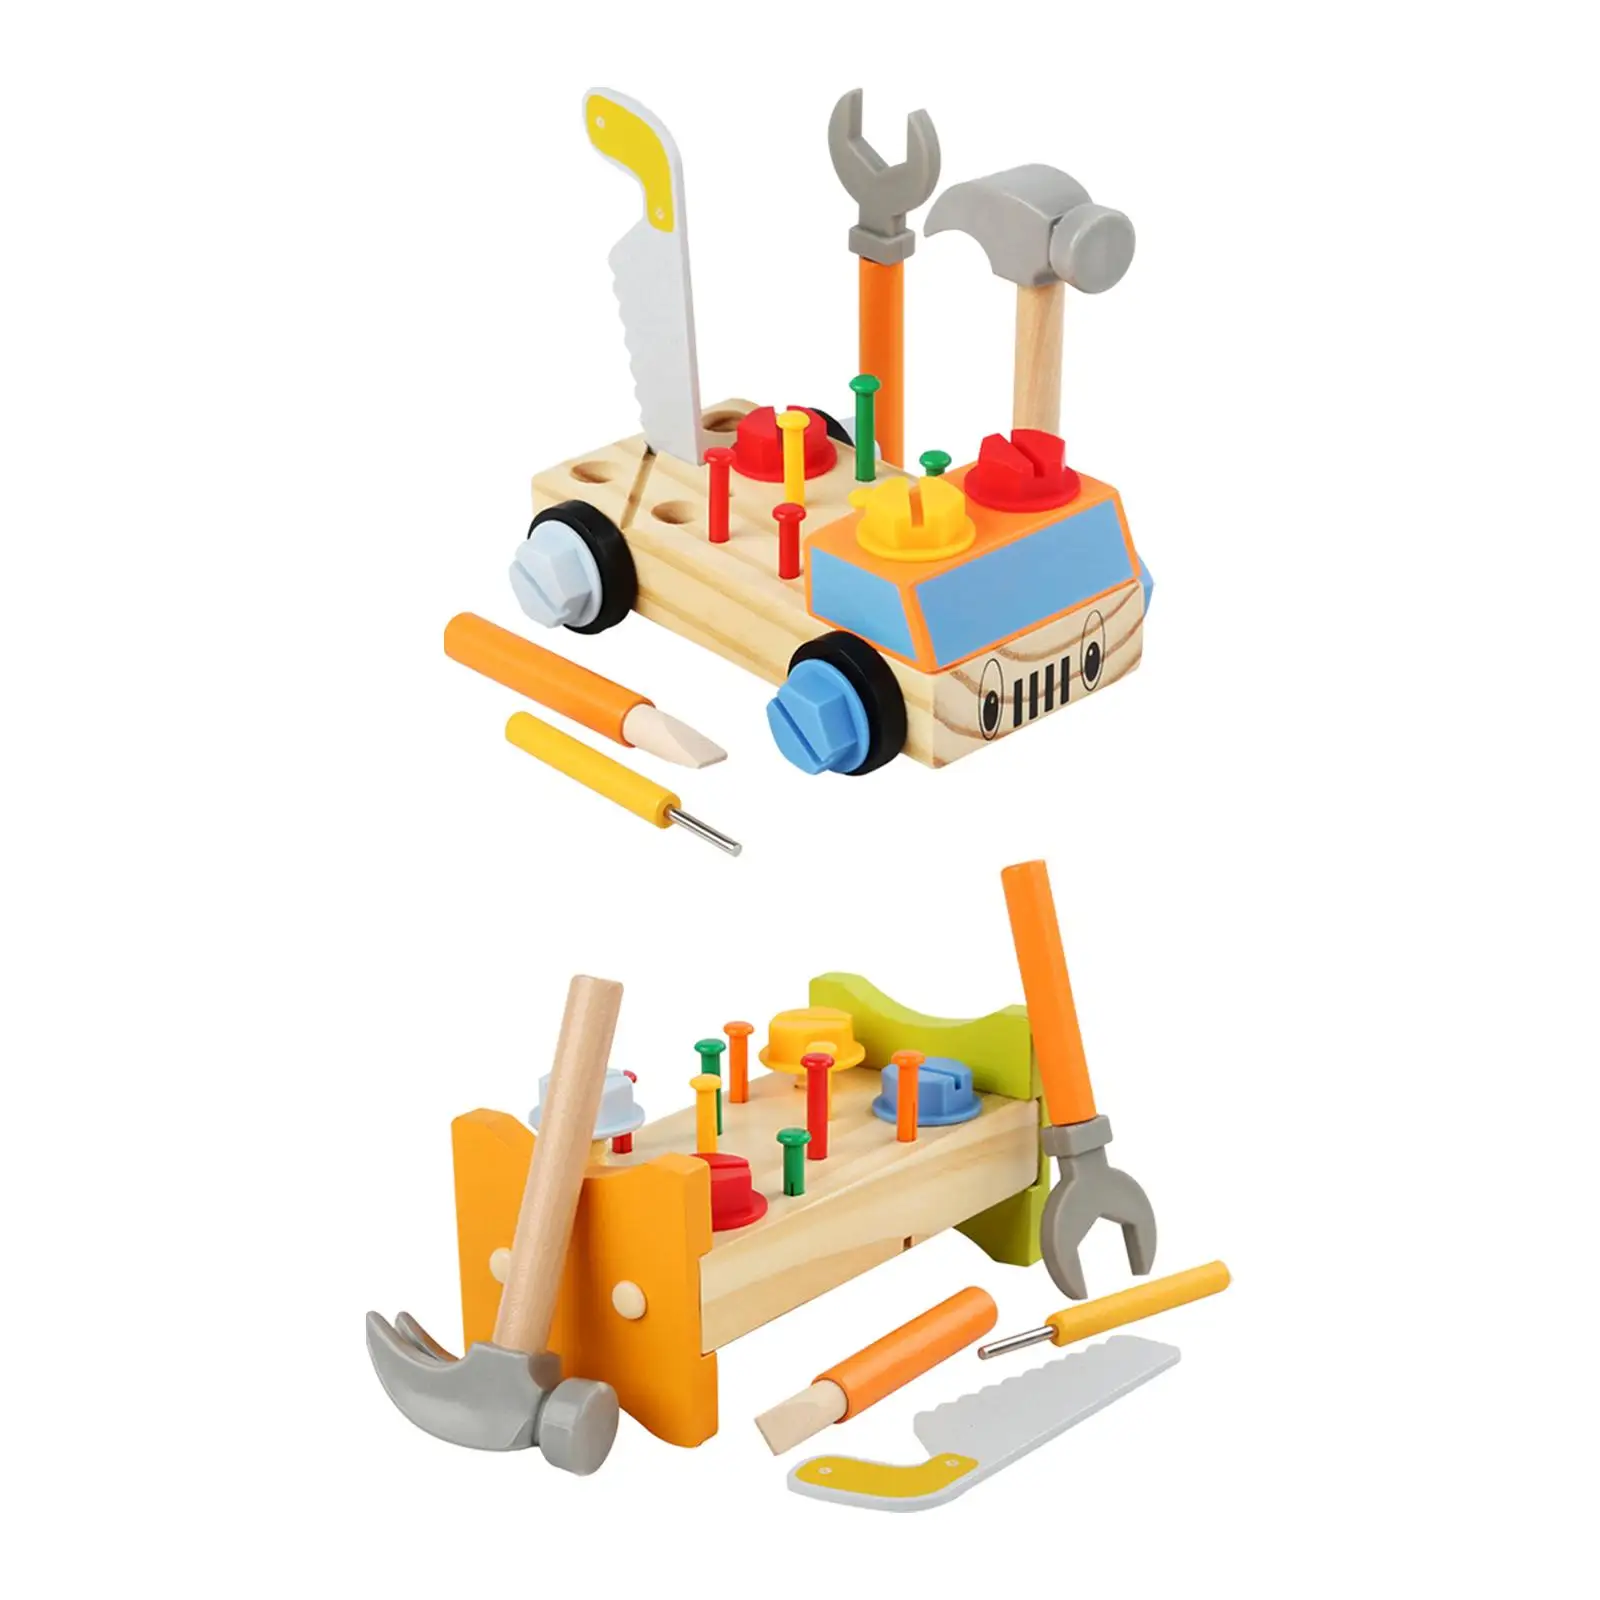 Wooden Play Tool Set Children`s Construction Tool Workbench for Preschool Ages